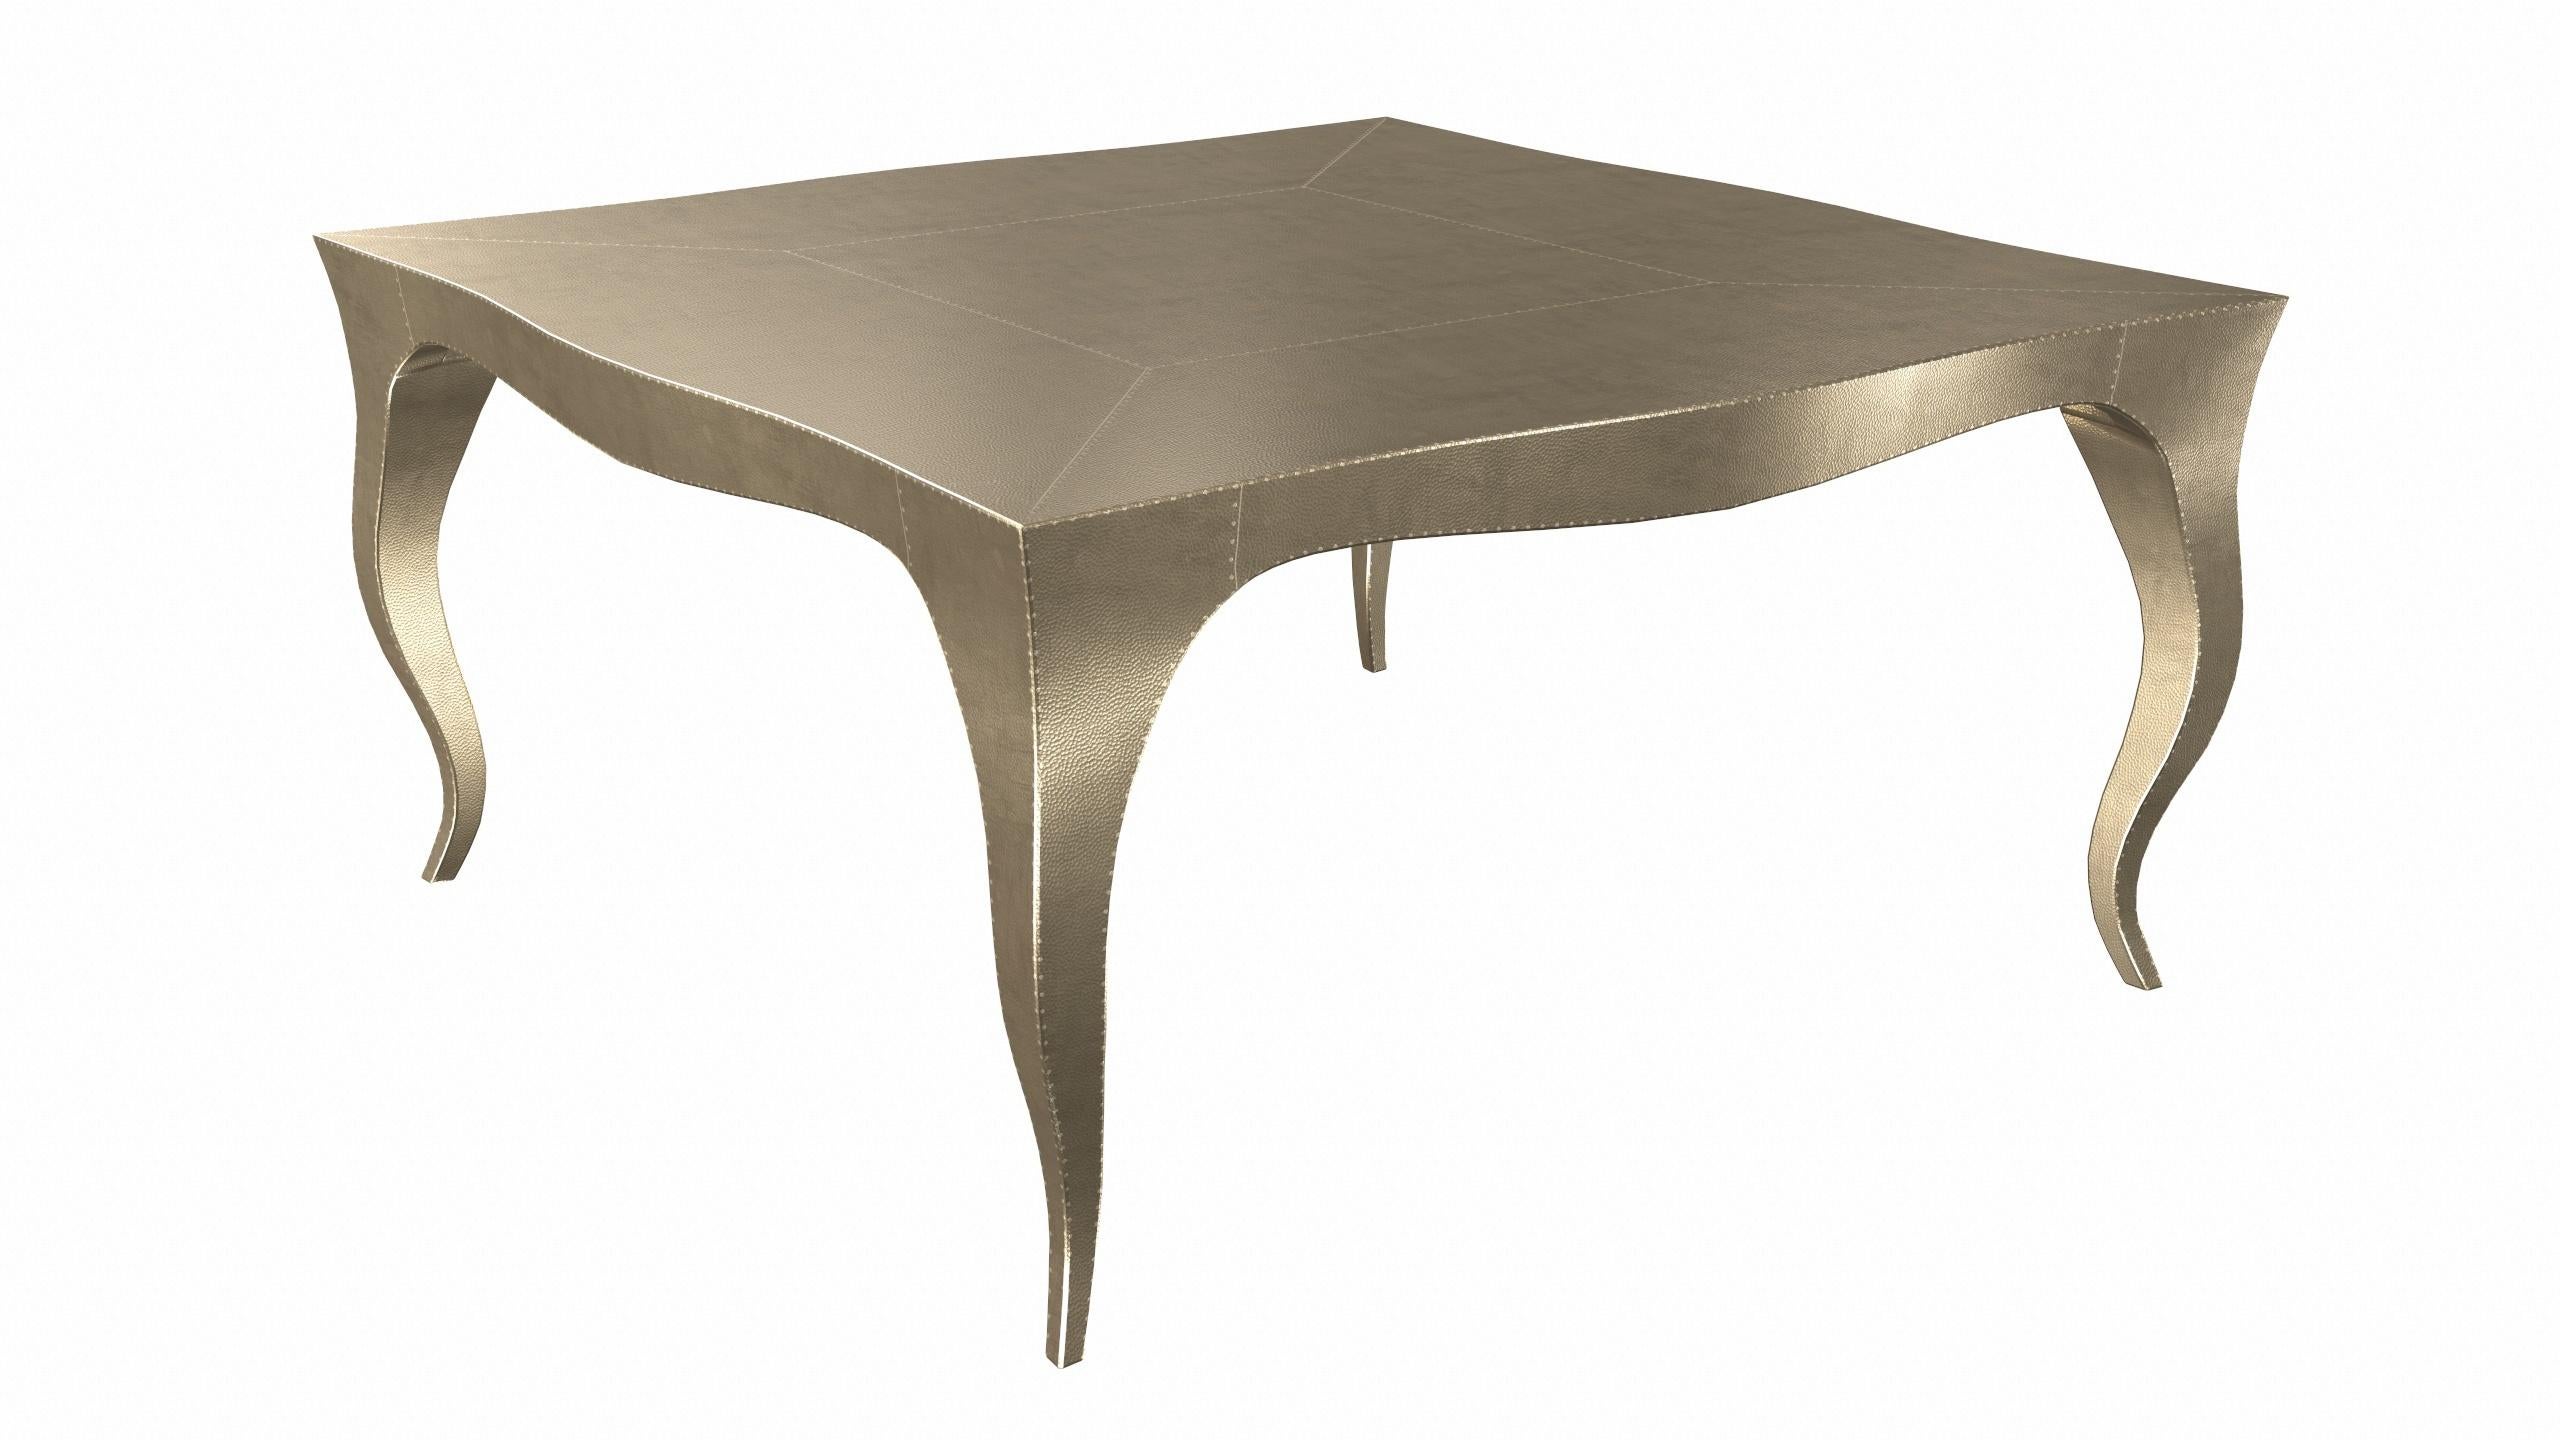 Contemporary Louise Art Deco Center Tables Mid. Hammered Brass 18.5x18.5x10 inch For Sale